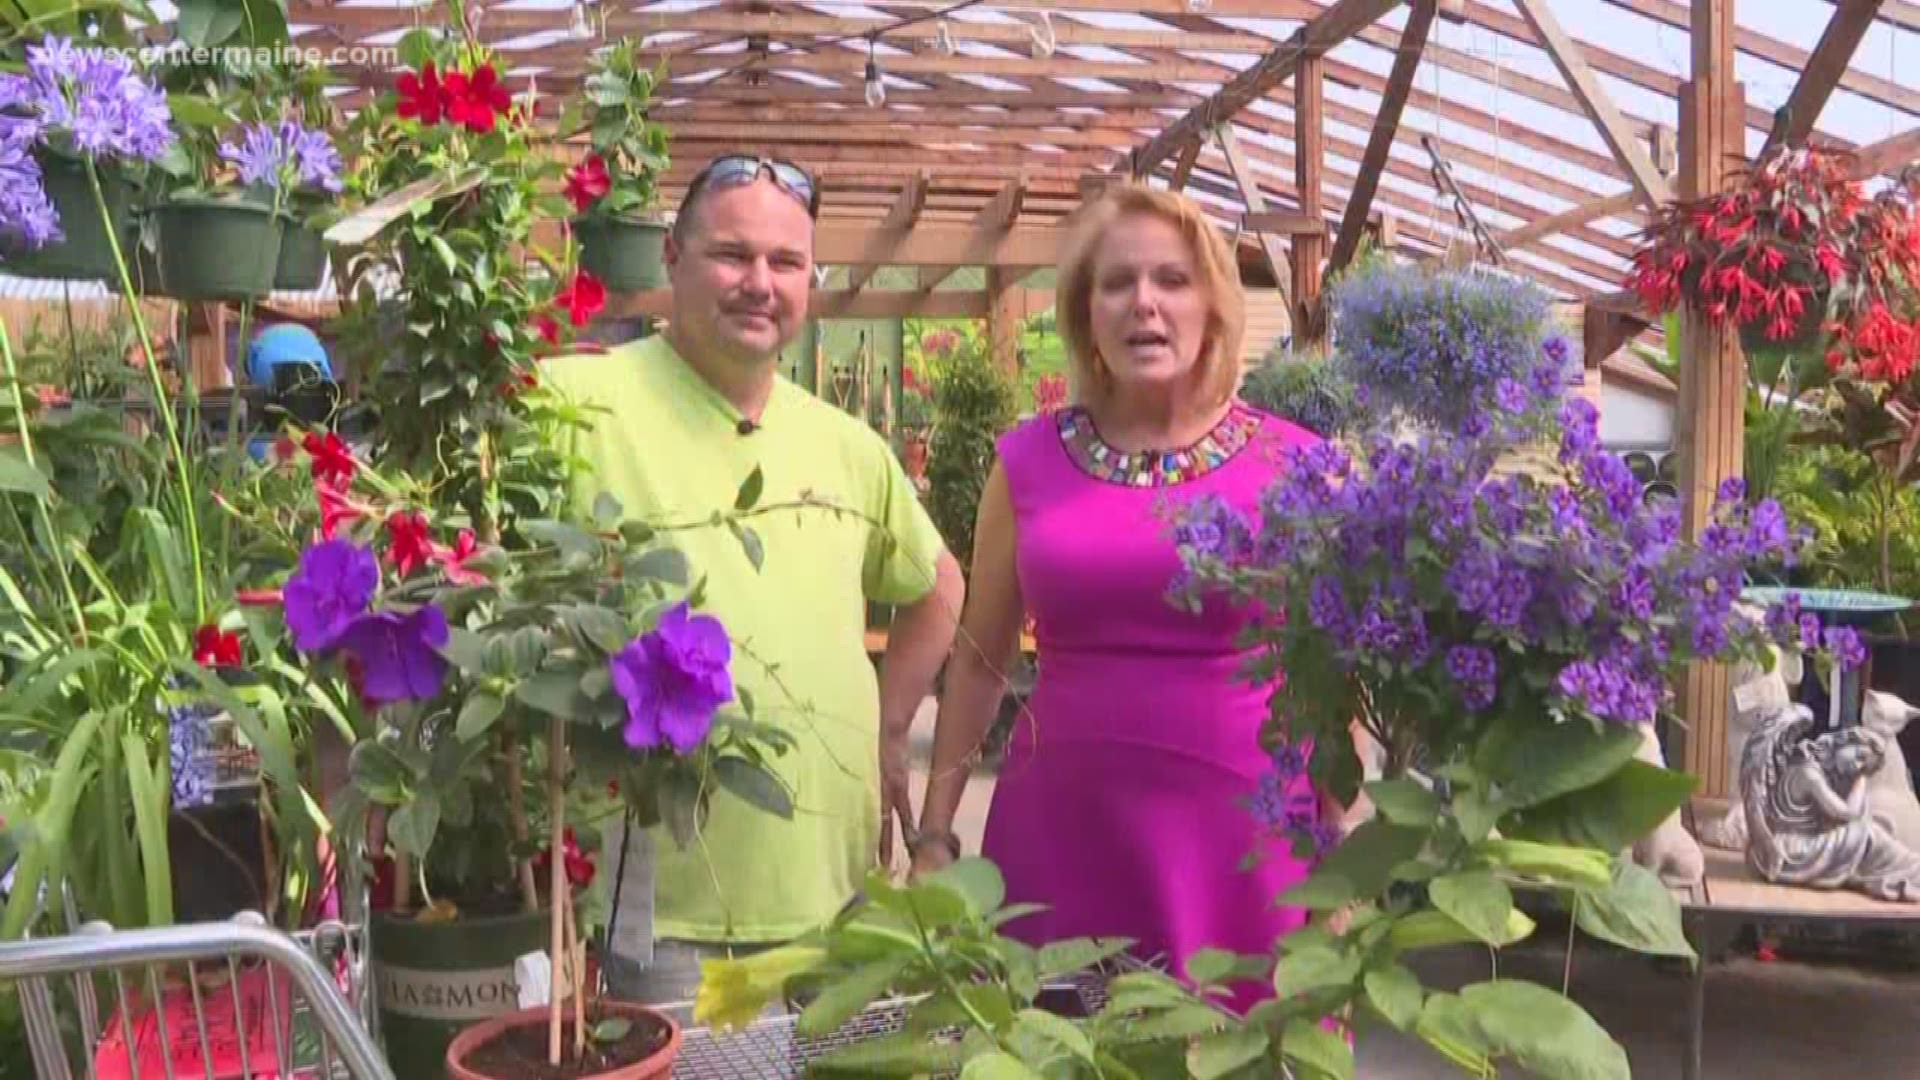 Cindy Williams and Tom Estabrook give tips on what you should do to successfully move your tropical plants from inside your home to your outdoor garden